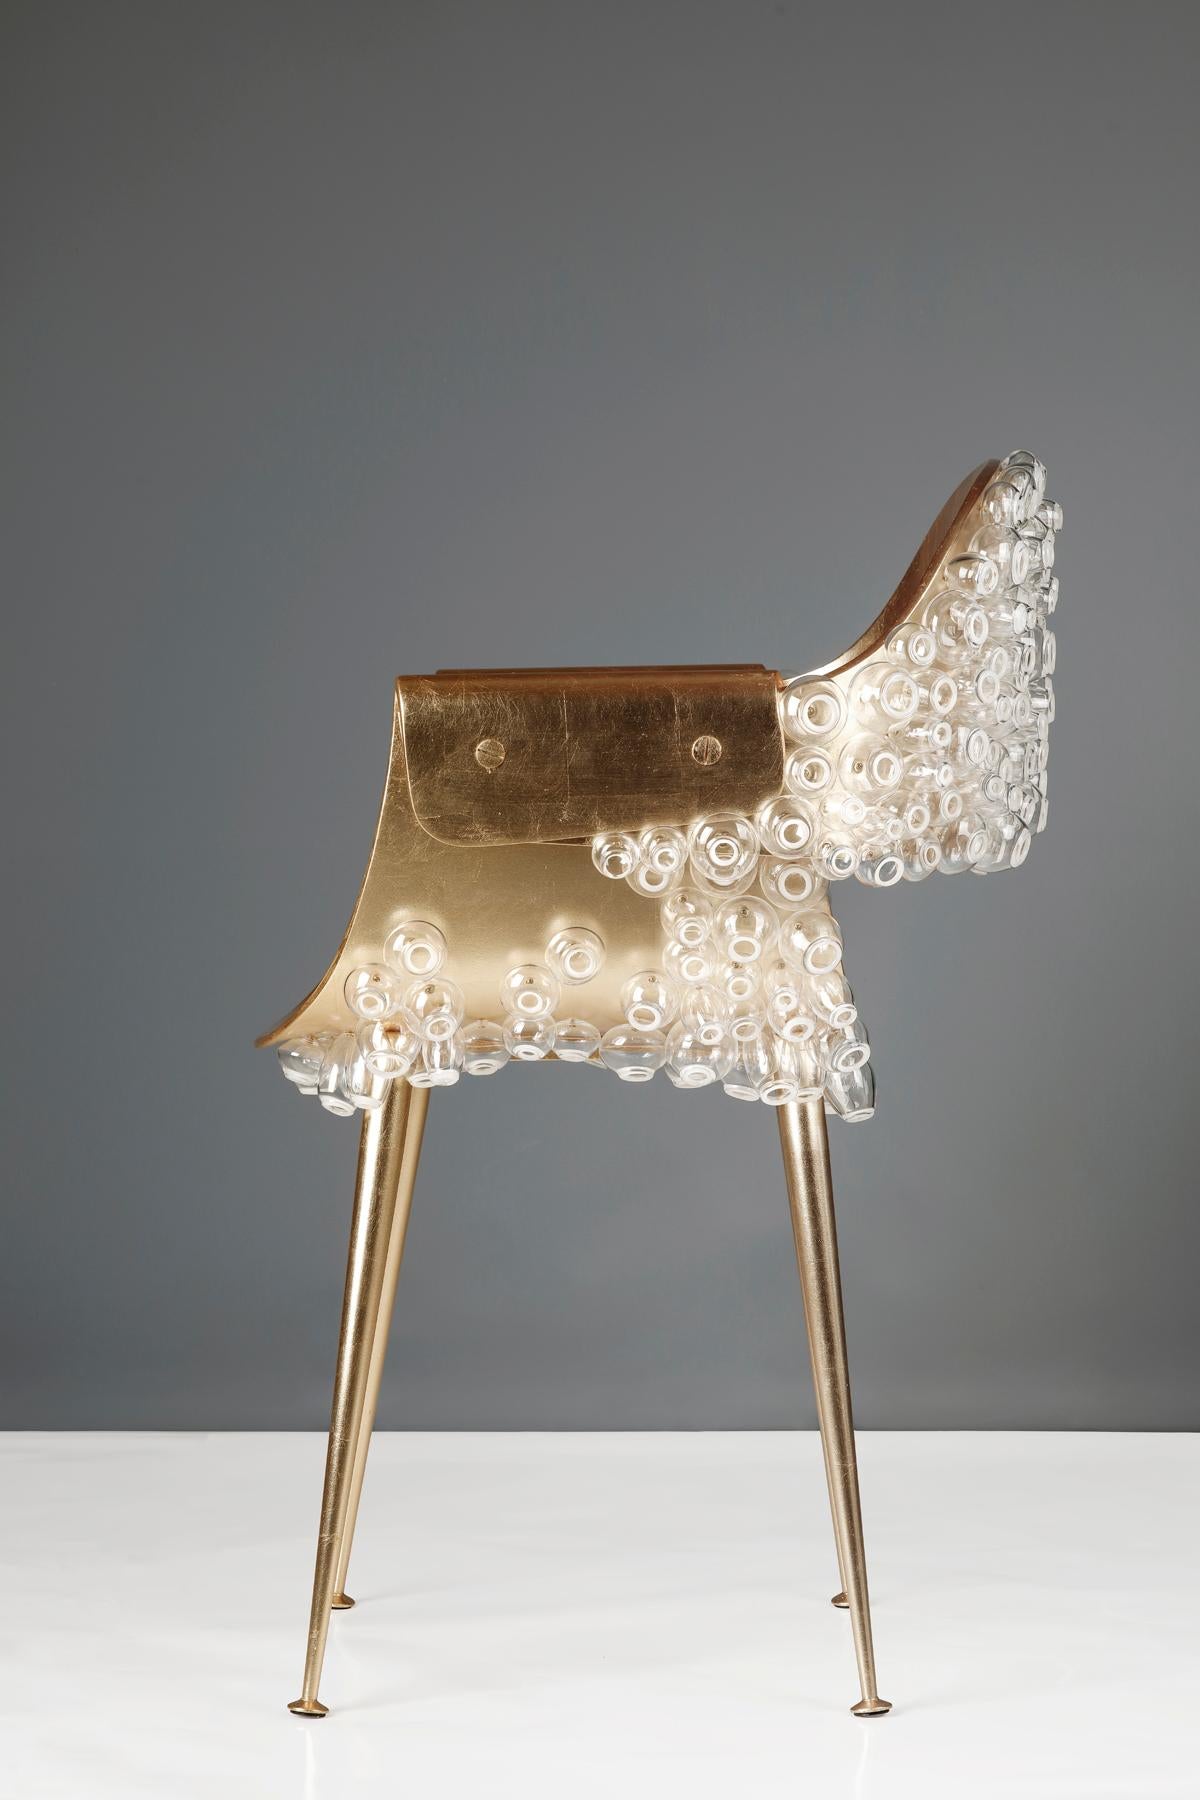 The traditional stability of metal and fragility of glass are juxtaposed in this dreamlike subaqueous chair. To rest in this chair is to collude in the subversion of conventional materiality, where one can be supported by barnacles made of glass.